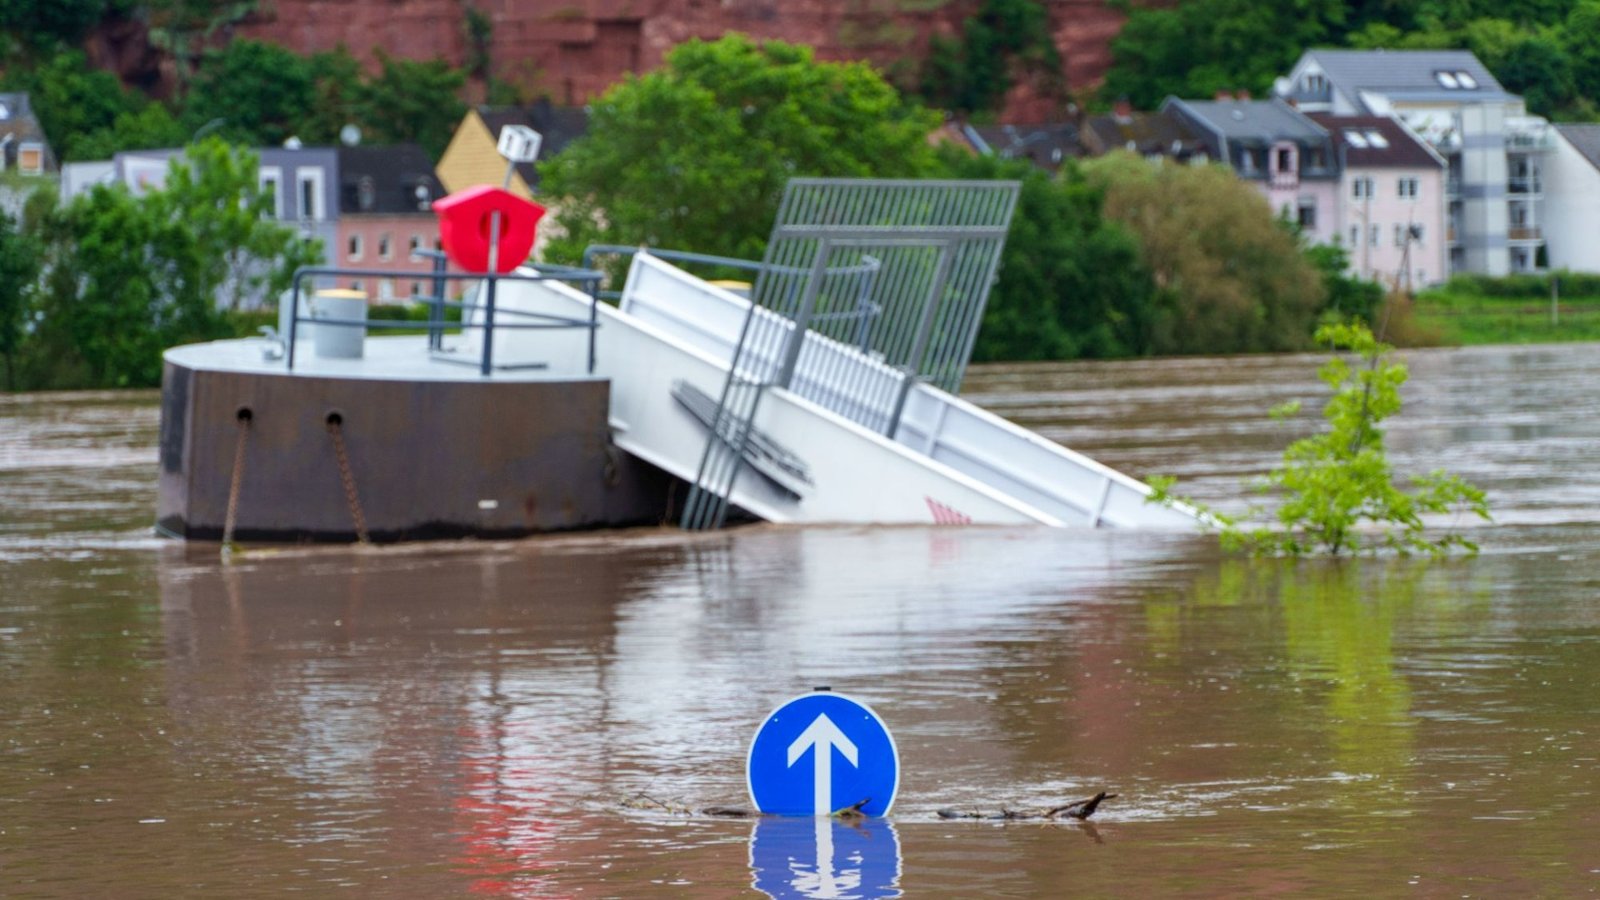 Devastating floods sweep German town turning roads into rivers as city sends out emergency alerts after heavy rain